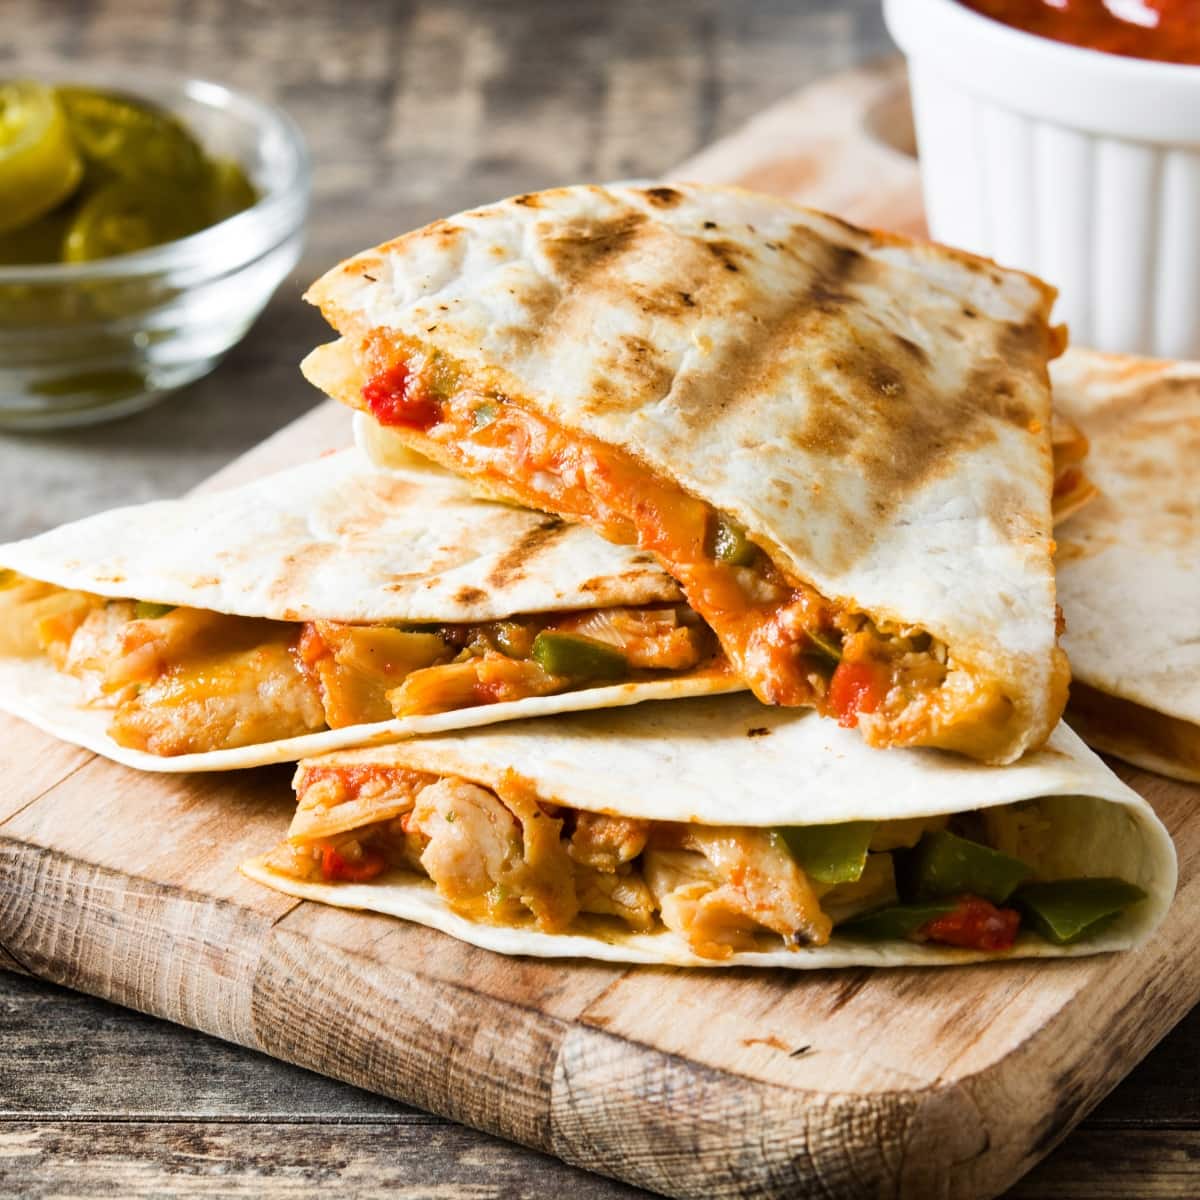 Mexican Quesadillas with Cheese, Peppers and Chicken